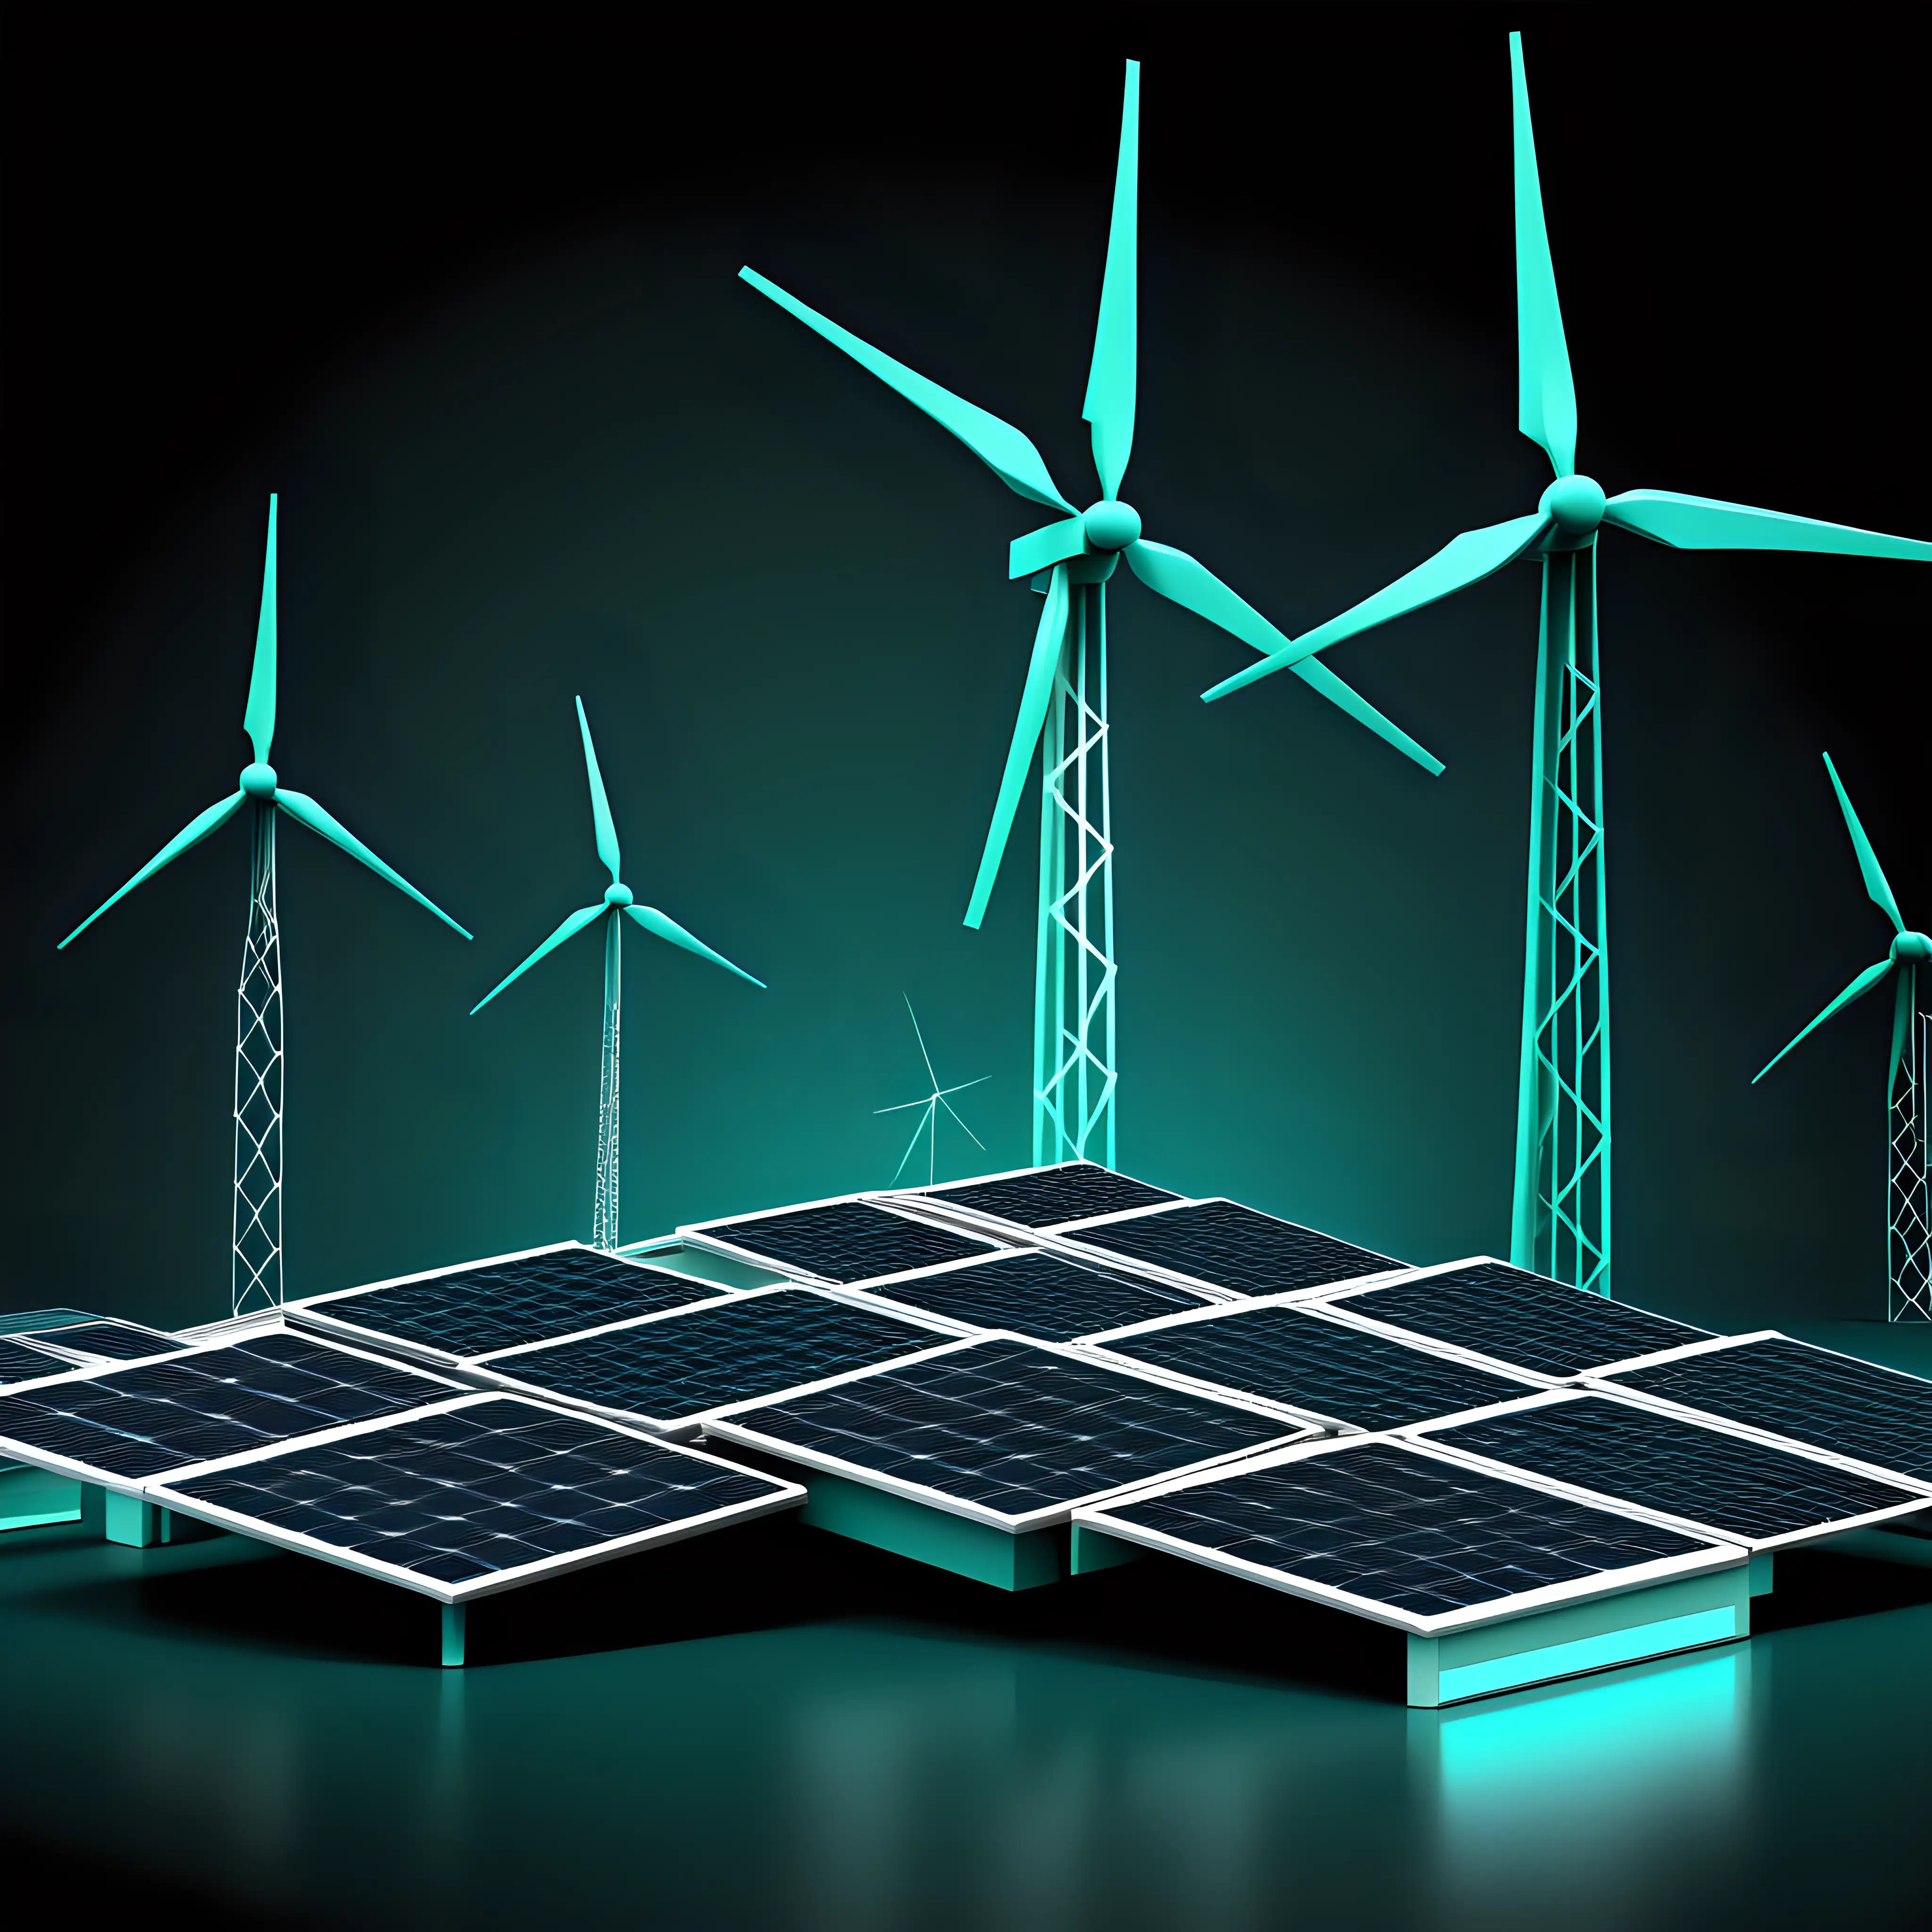 teal color, renewable energy website section, dark background, no text, blockchain related, 
